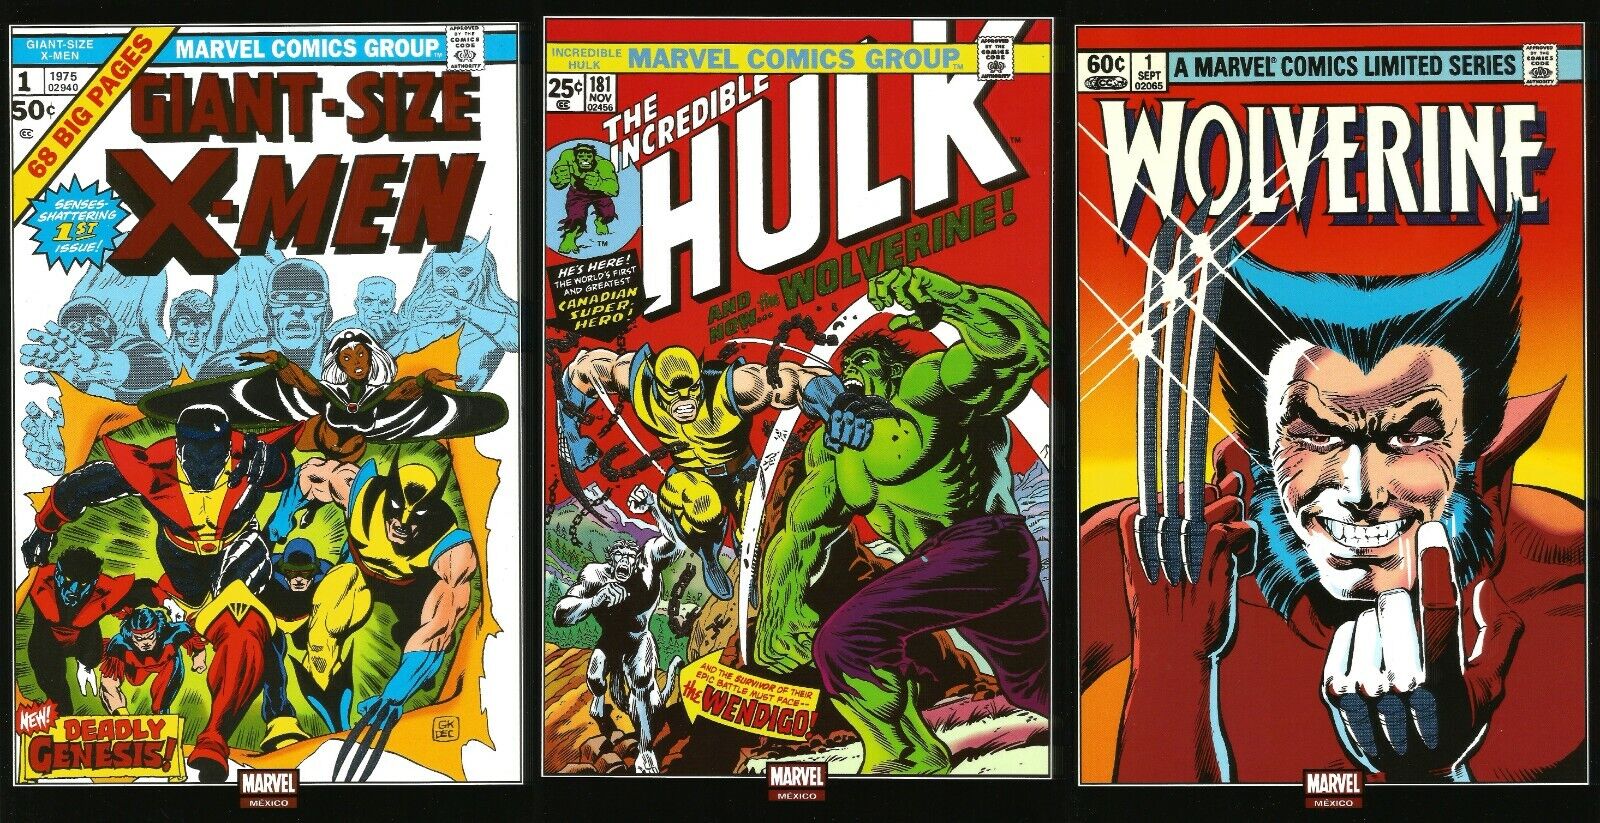 MARVEL Mexico INCREDIBLE HULK #181 1ST APPEARANCE OF WOLVERINE FOIL Reprint Без бренда